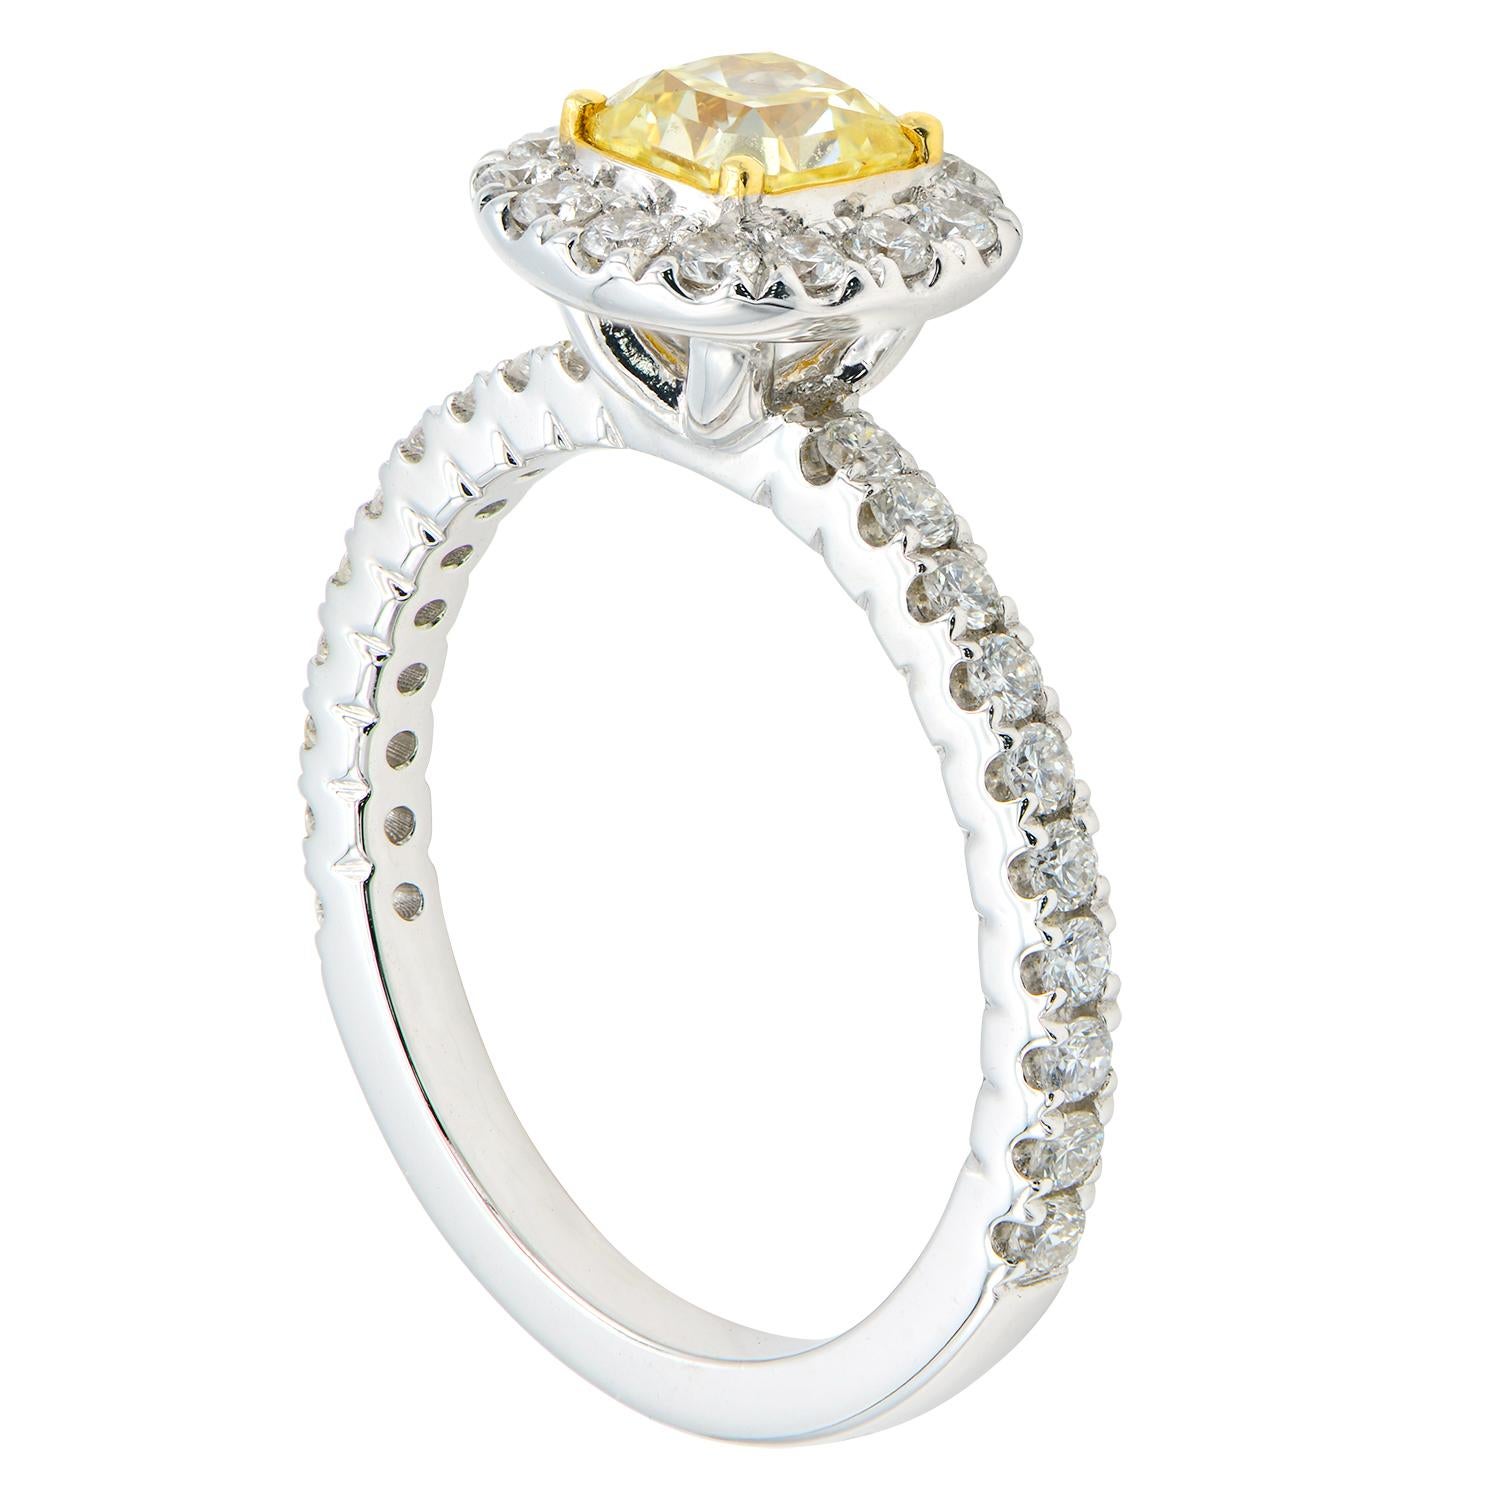 This stunning diamond ring has a 0.75 carat yellow radiant cut diamond in the center which is surrounded by 14 VS2, G color diamonds in a halo with 20 more diamonds going halfway around the band. There is a total of 0.59 carats of white diamonds.